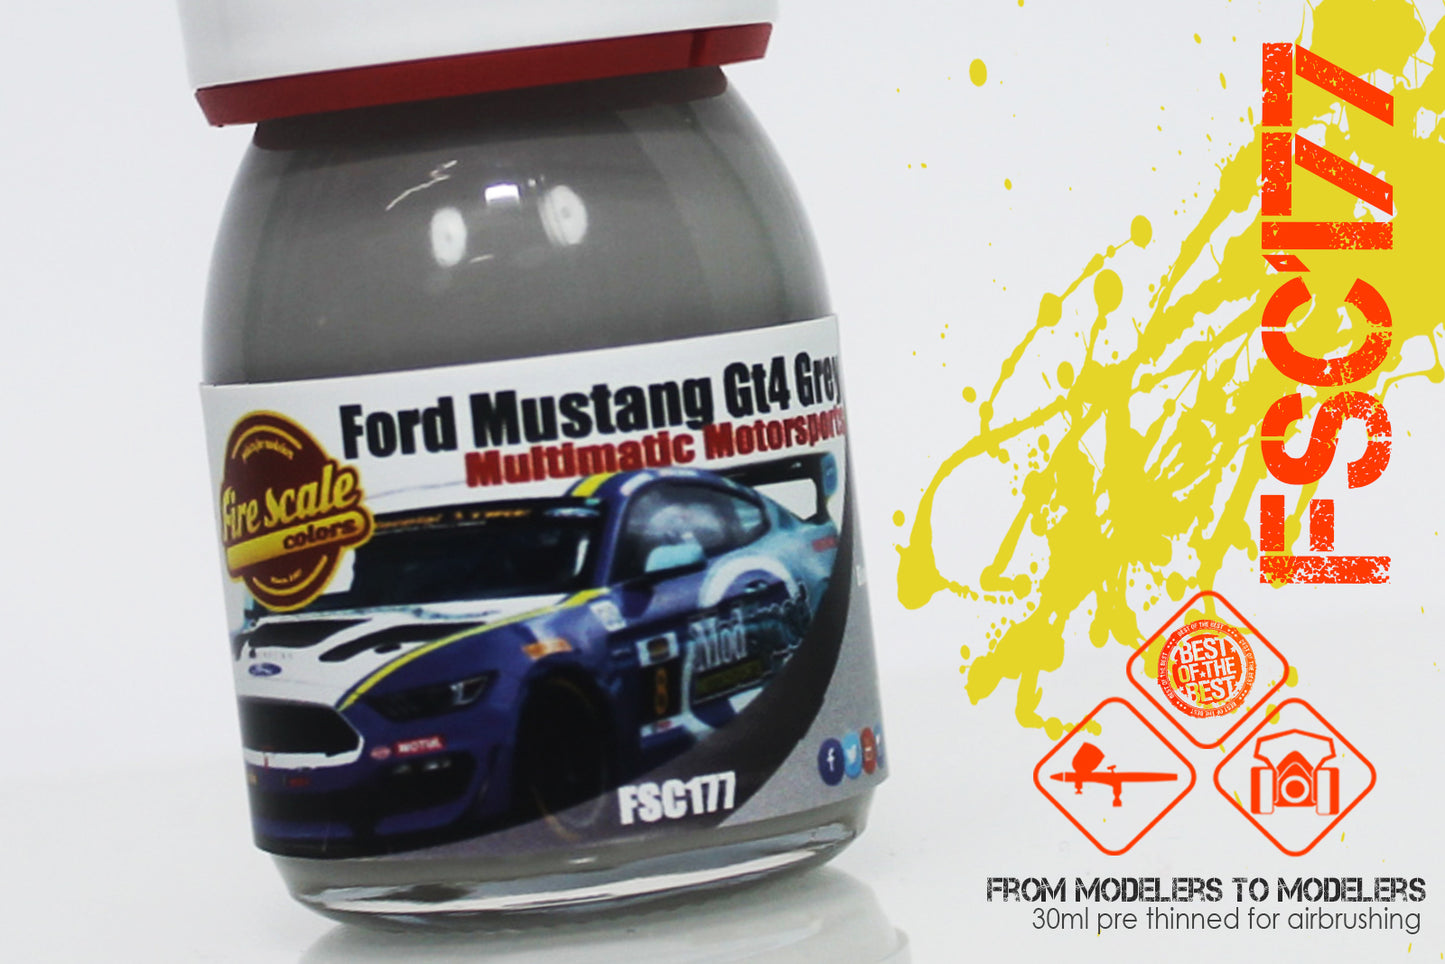 Ford Mustang GT4 Multimatic Motorsports Gray